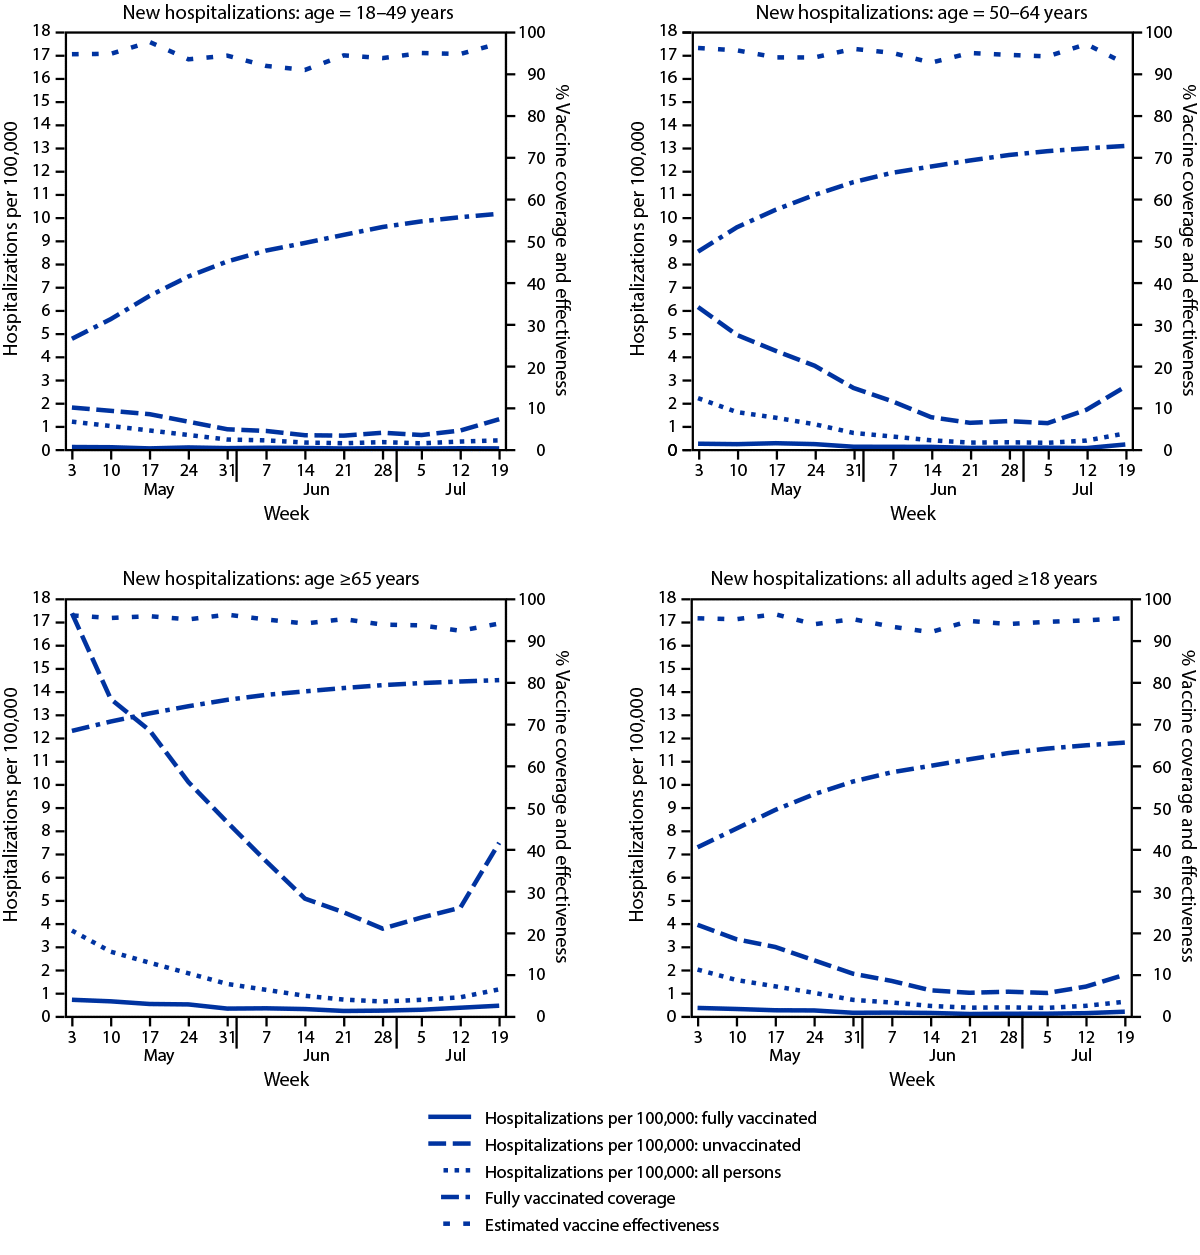 Figure is a series of four panels showing new hospitalizations with laboratory-confirmed COVID-19 among fully vaccinated and unvaccinated adults, vaccine coverage, and estimated vaccine effectiveness, by age in New York during May 3–July 25, 2021.